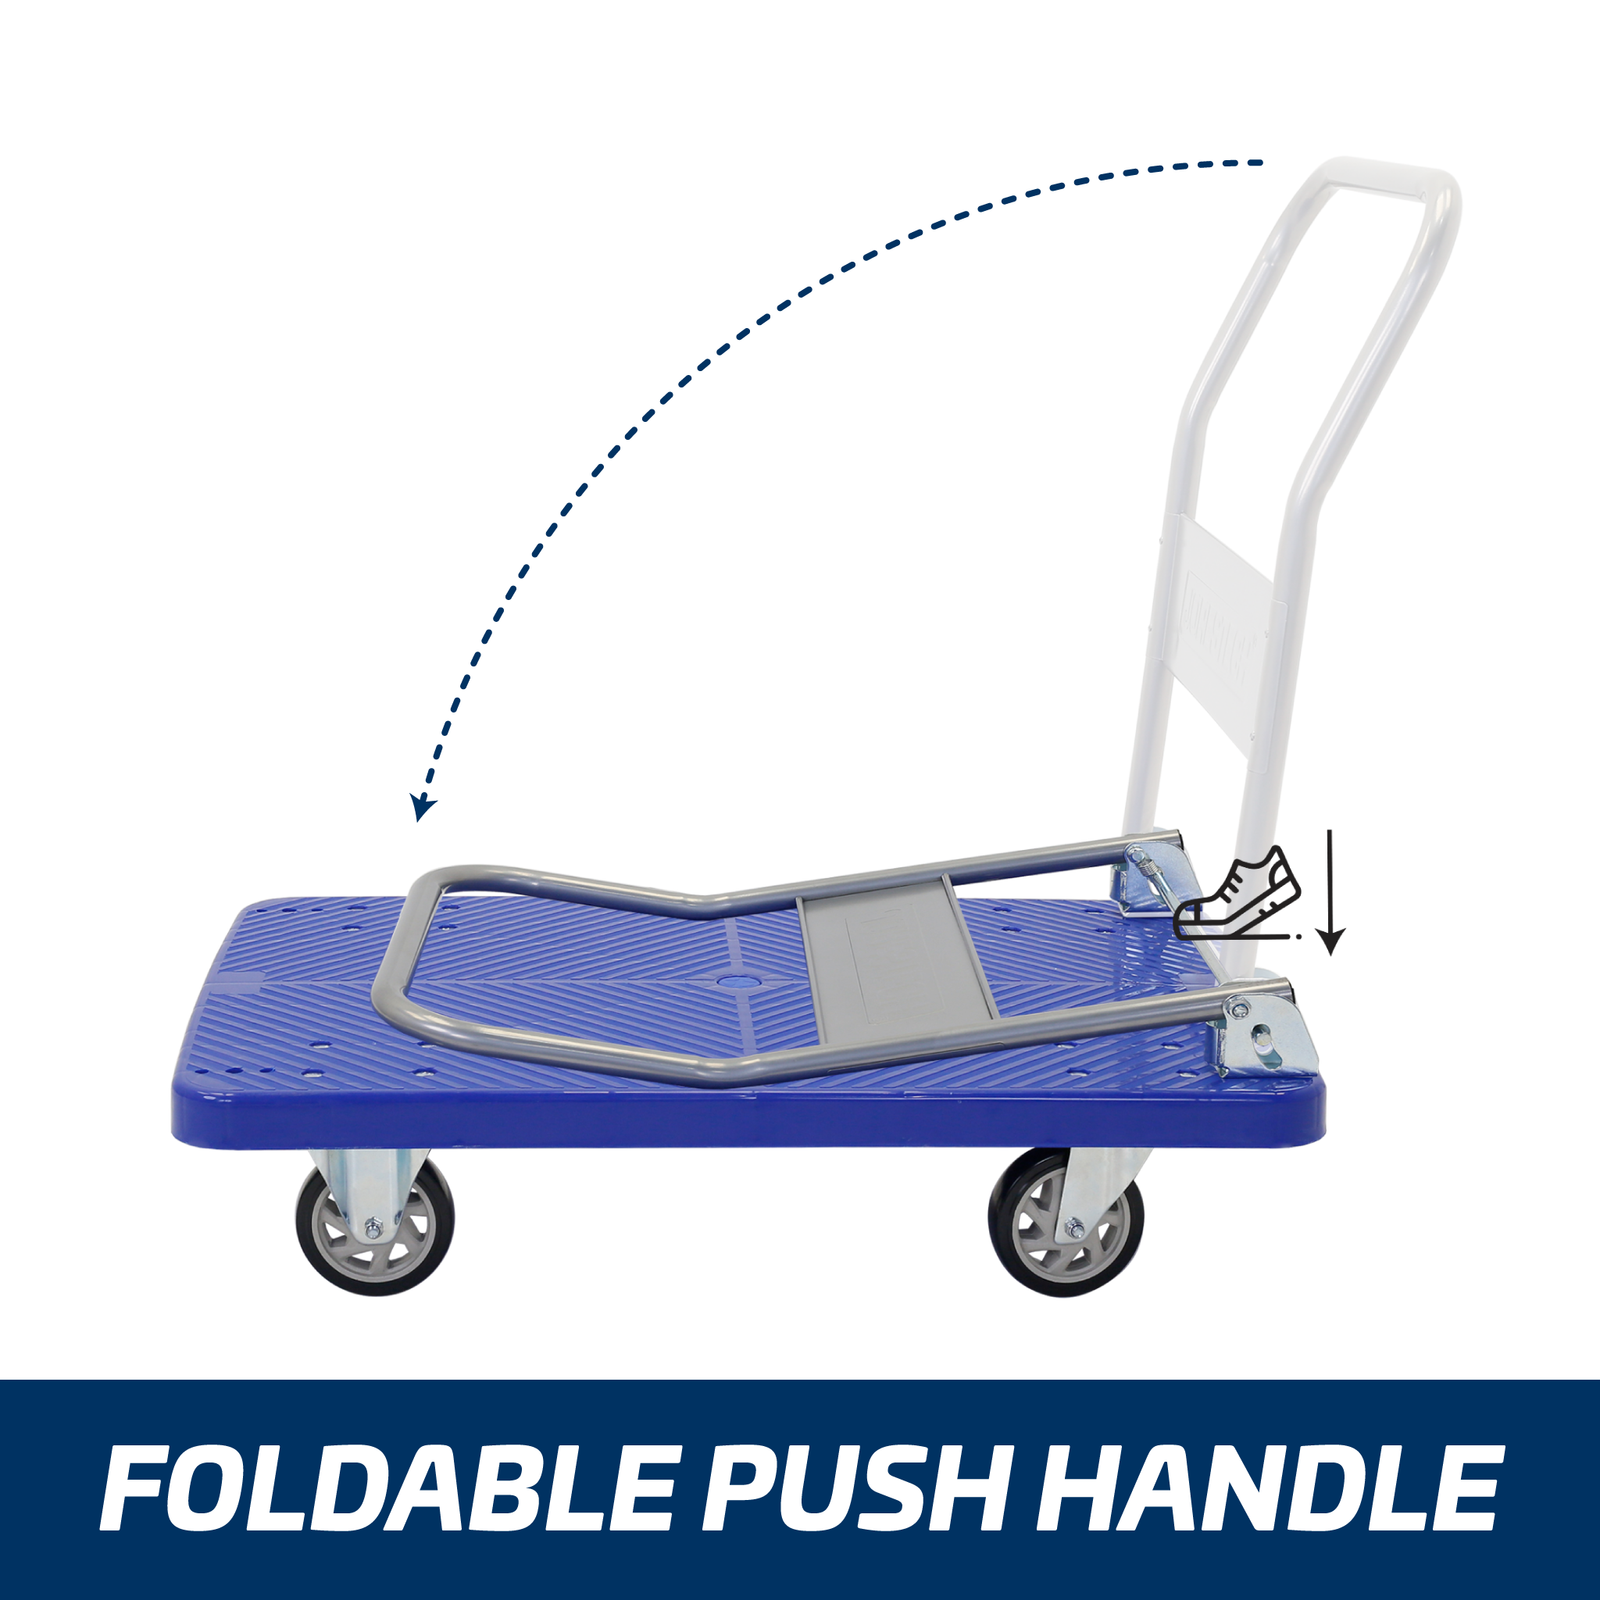 The JORES TECHNOLOGIES® foldable platform cart showing where to step to make handle collapse for easy storage and transportation